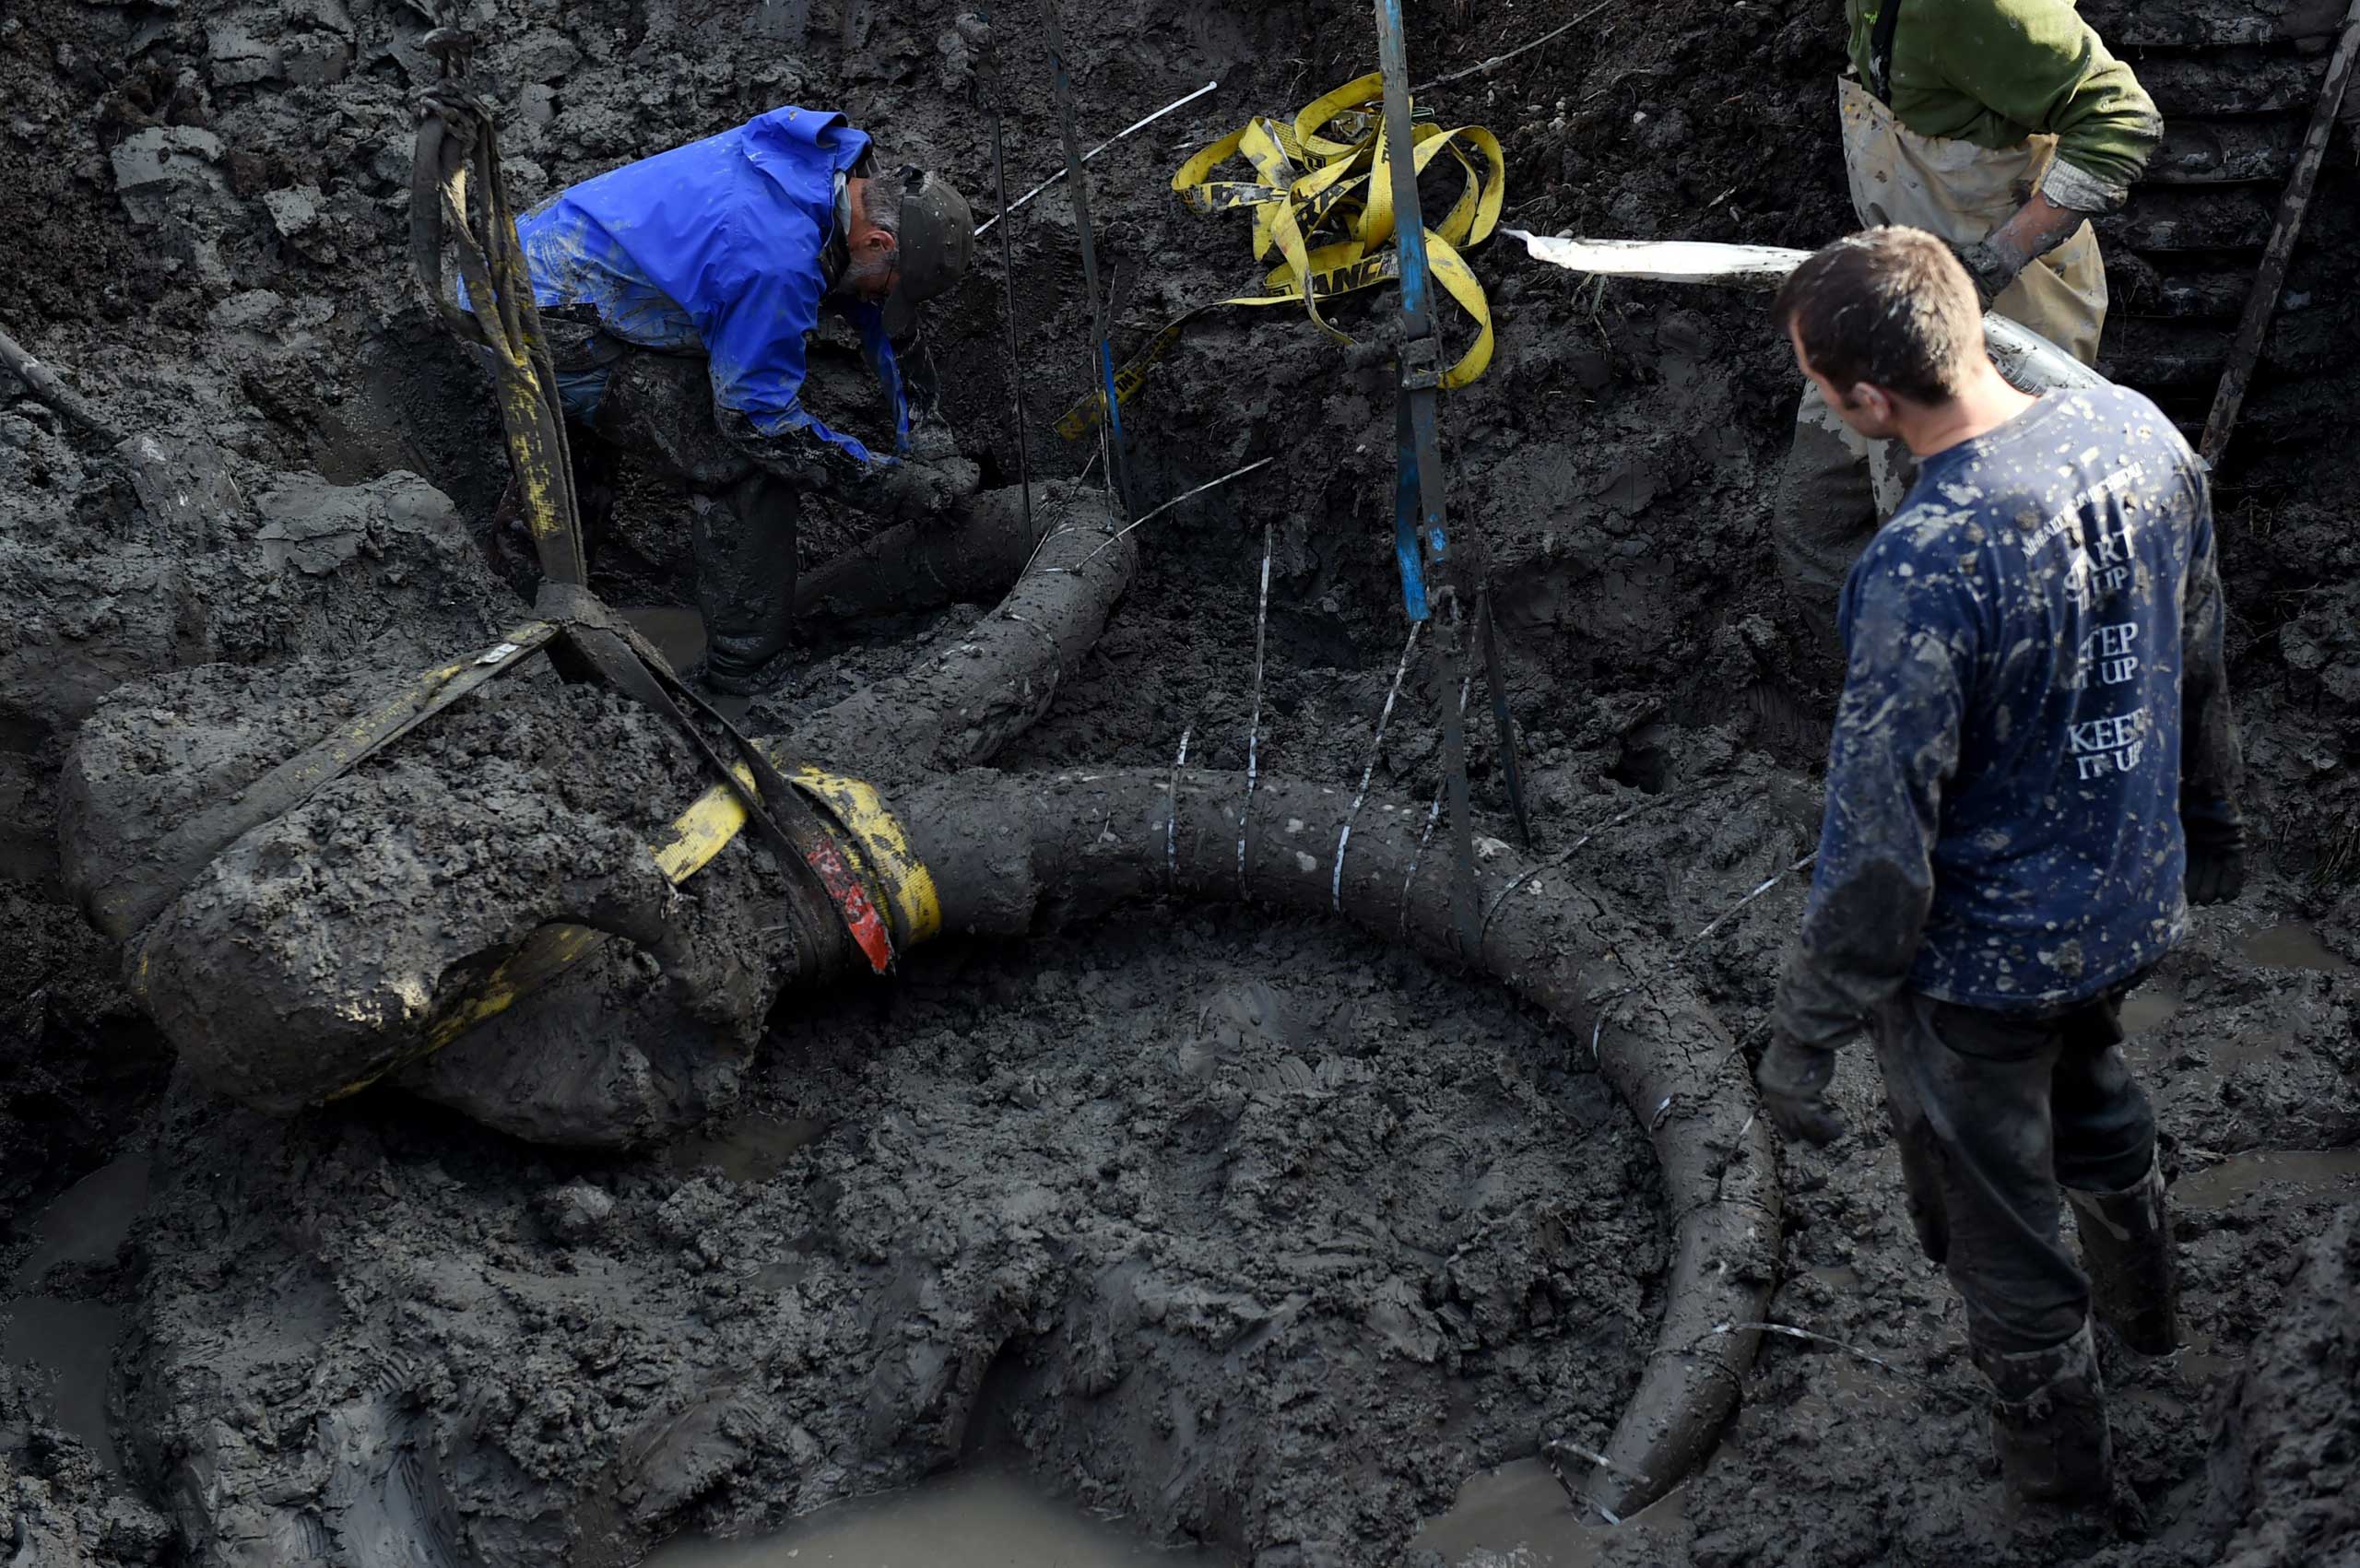 University of Michigan professor Dan Fisher and a team of Michigan students work to excavate a woolly mammoth found on a farm in Lima Township, Oct. 1, 2015. (Melanie Maxwell—MLIVE.COM /Landov)